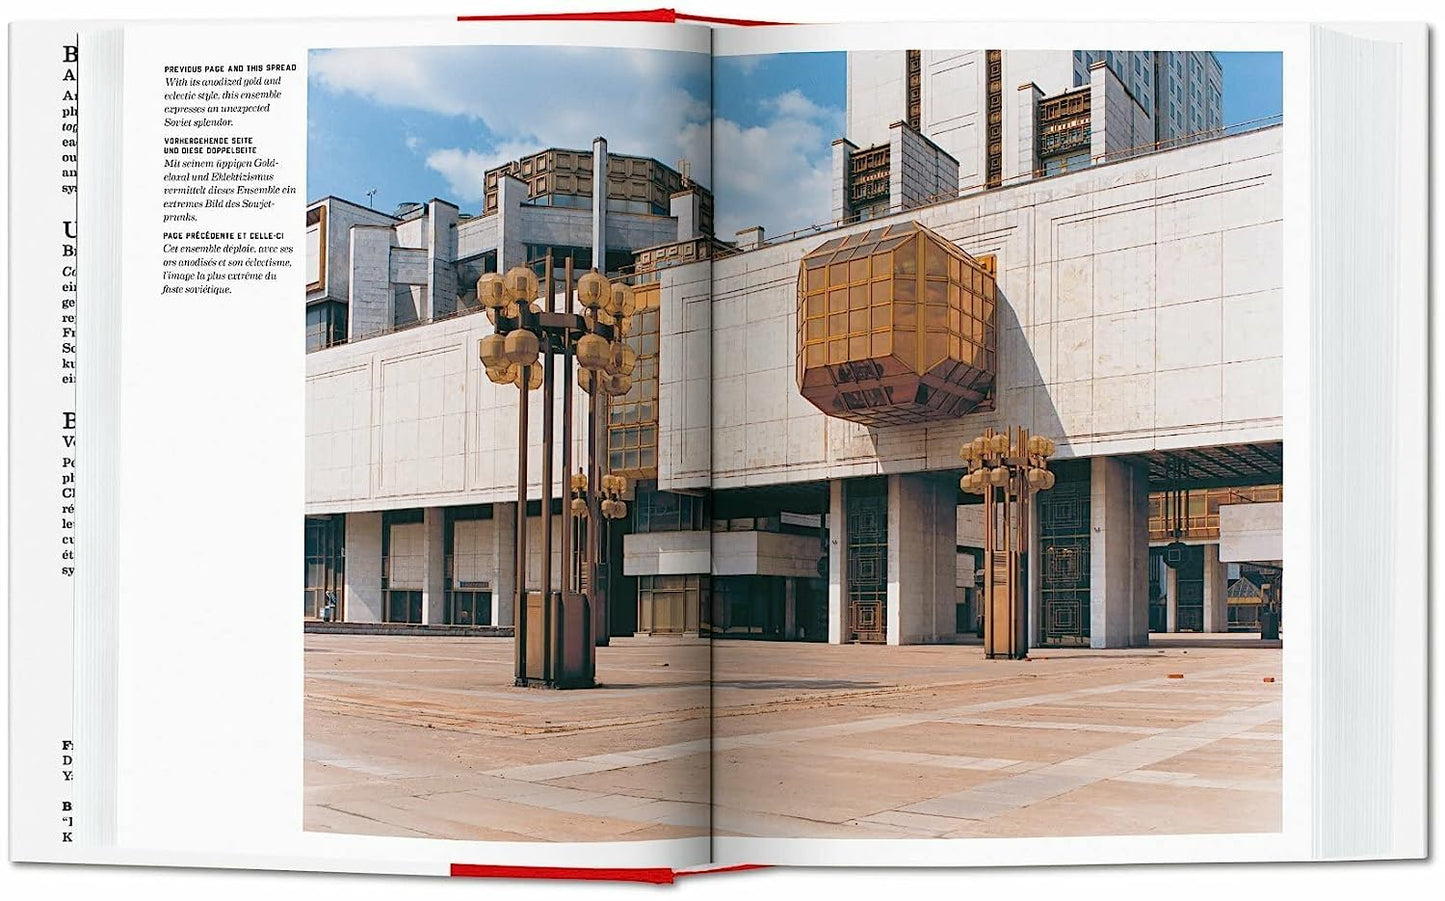 CCCP. Cosmic Communist Constructions Photographed. 40th Ed.